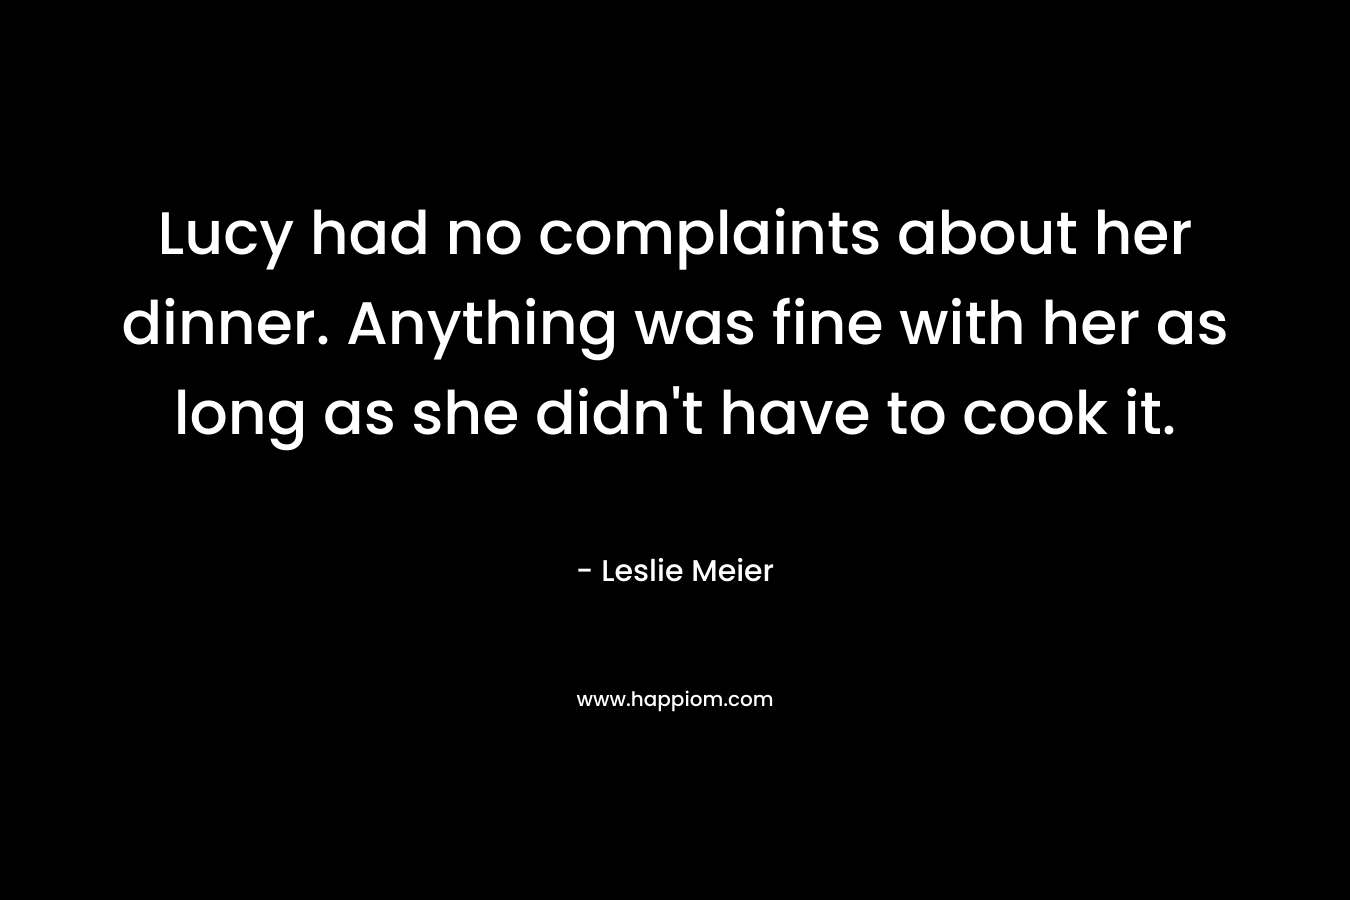 Lucy had no complaints about her dinner. Anything was fine with her as long as she didn’t have to cook it. – Leslie Meier